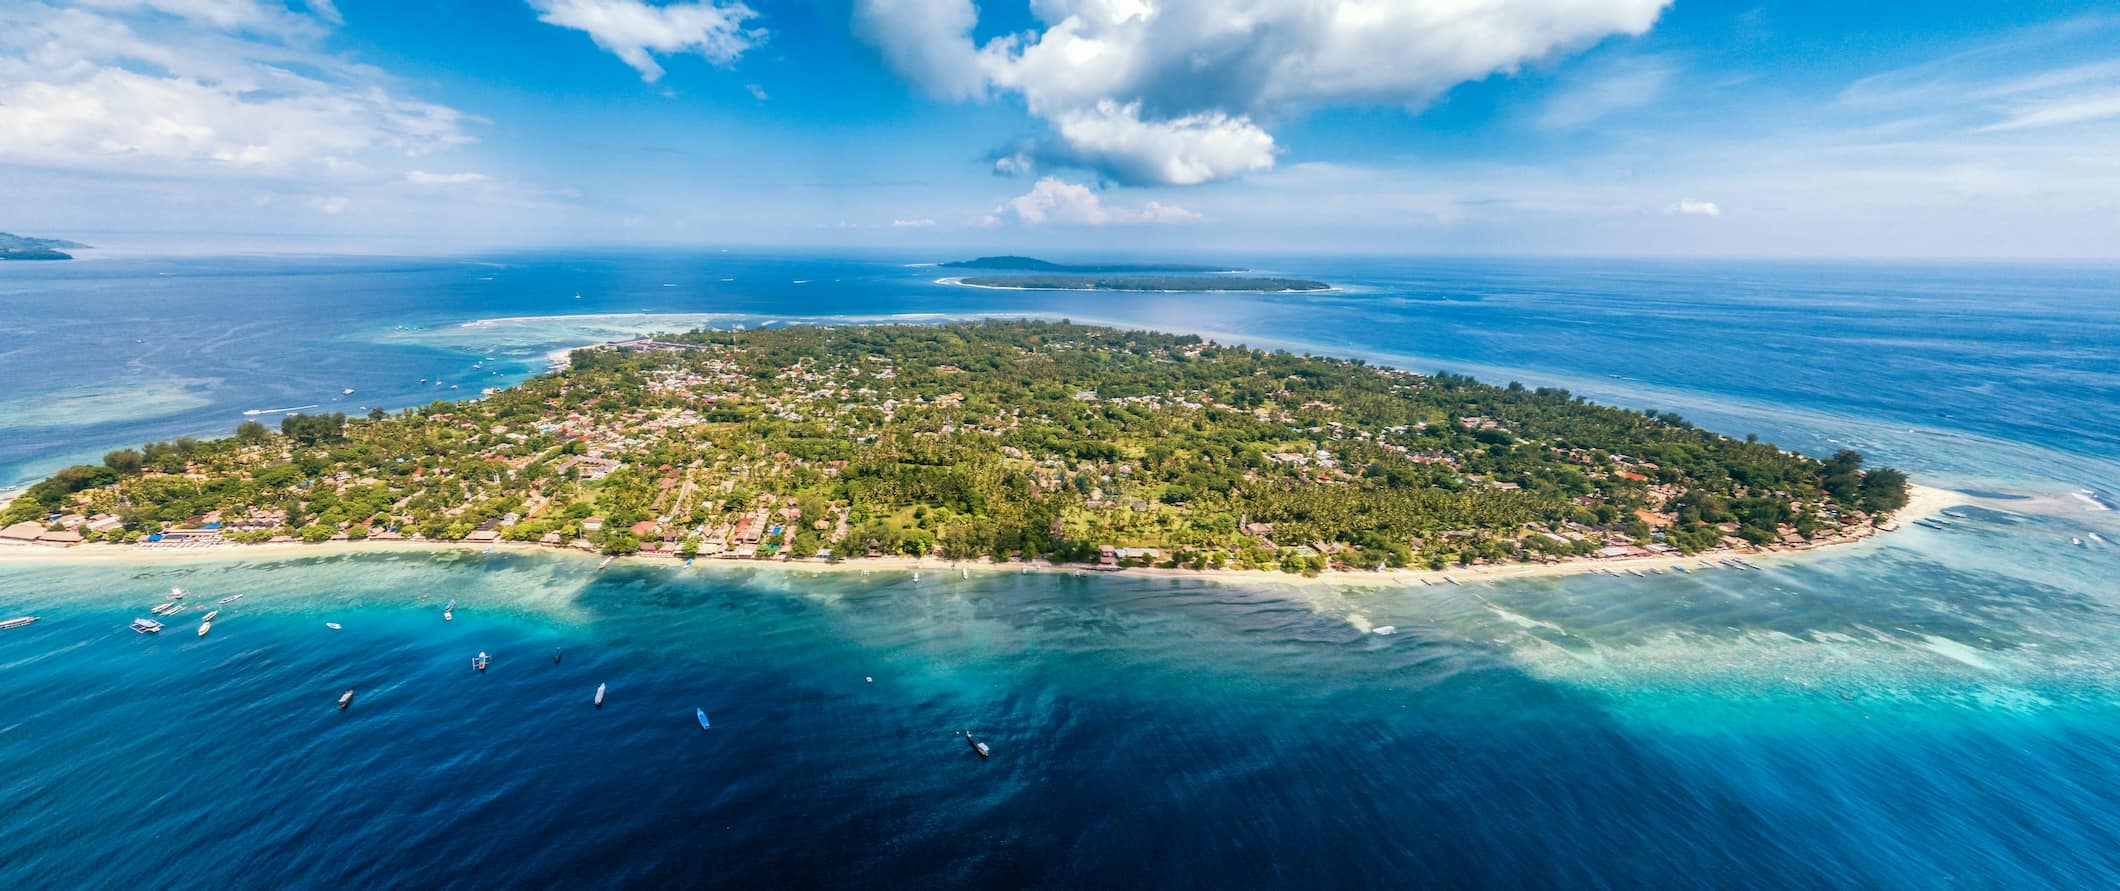 An aerial view of one of the picturesque Gili Islands in Indonesia